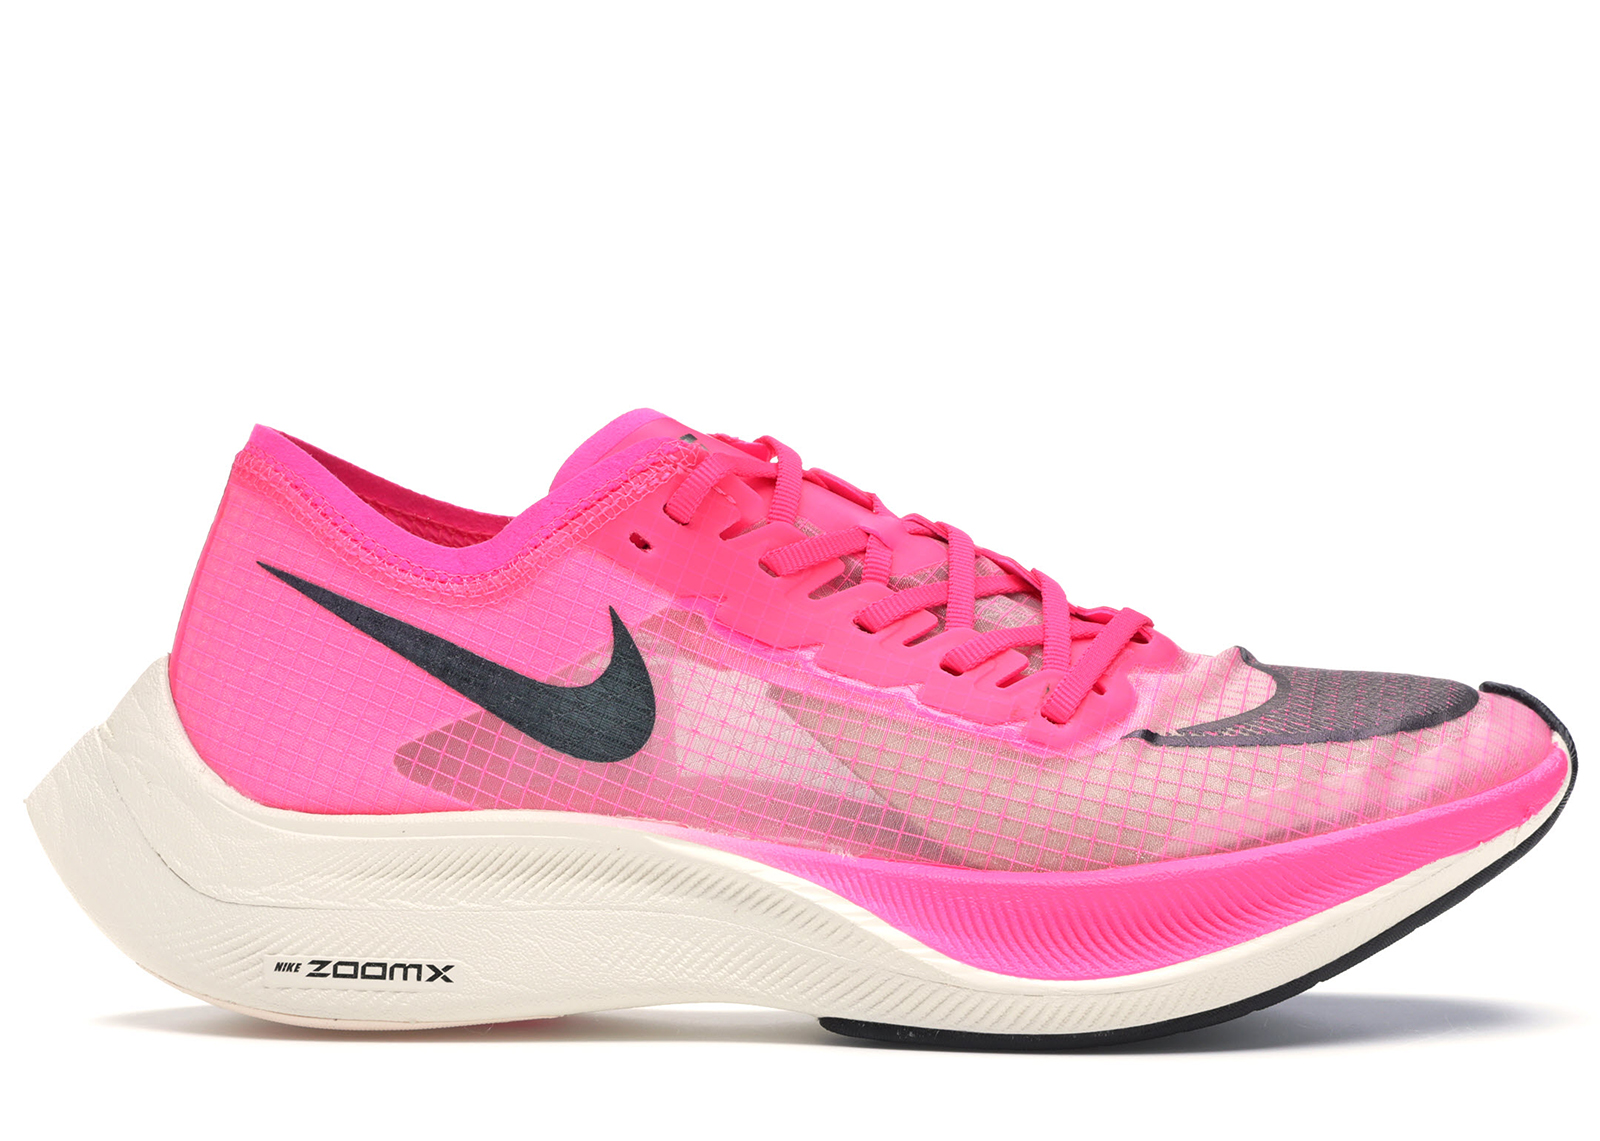 nike zoomx vaporfly pink